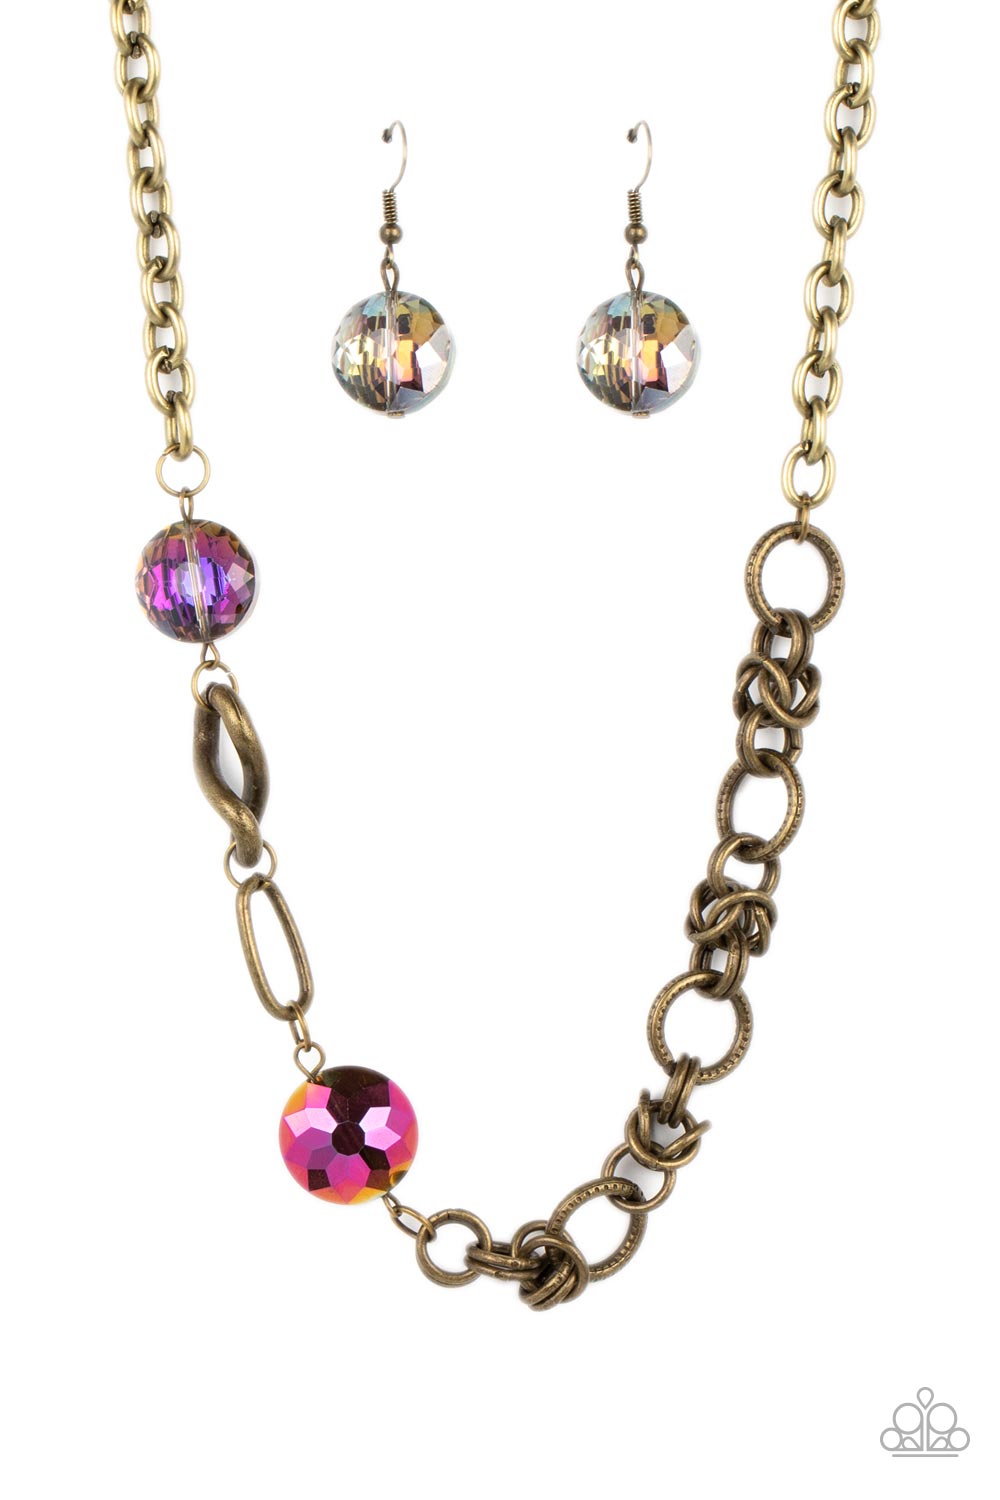 Paparazzi Accessories - Celestially Celtic - Brass Necklaces thick links of brass twist into Celtic knot-like details, linking together with textured brass hoops along the collar. A pair of faceted, saucer-shaped crystal beads, dipped in a reflective oil spill coating and bordered by brass frames, are added to the eclectic display, bringing a hint of colorful shimmer to the design. Features an adjustable clasp closure. Due to its prismatic palette, color may vary. Sold as one individual necklace.